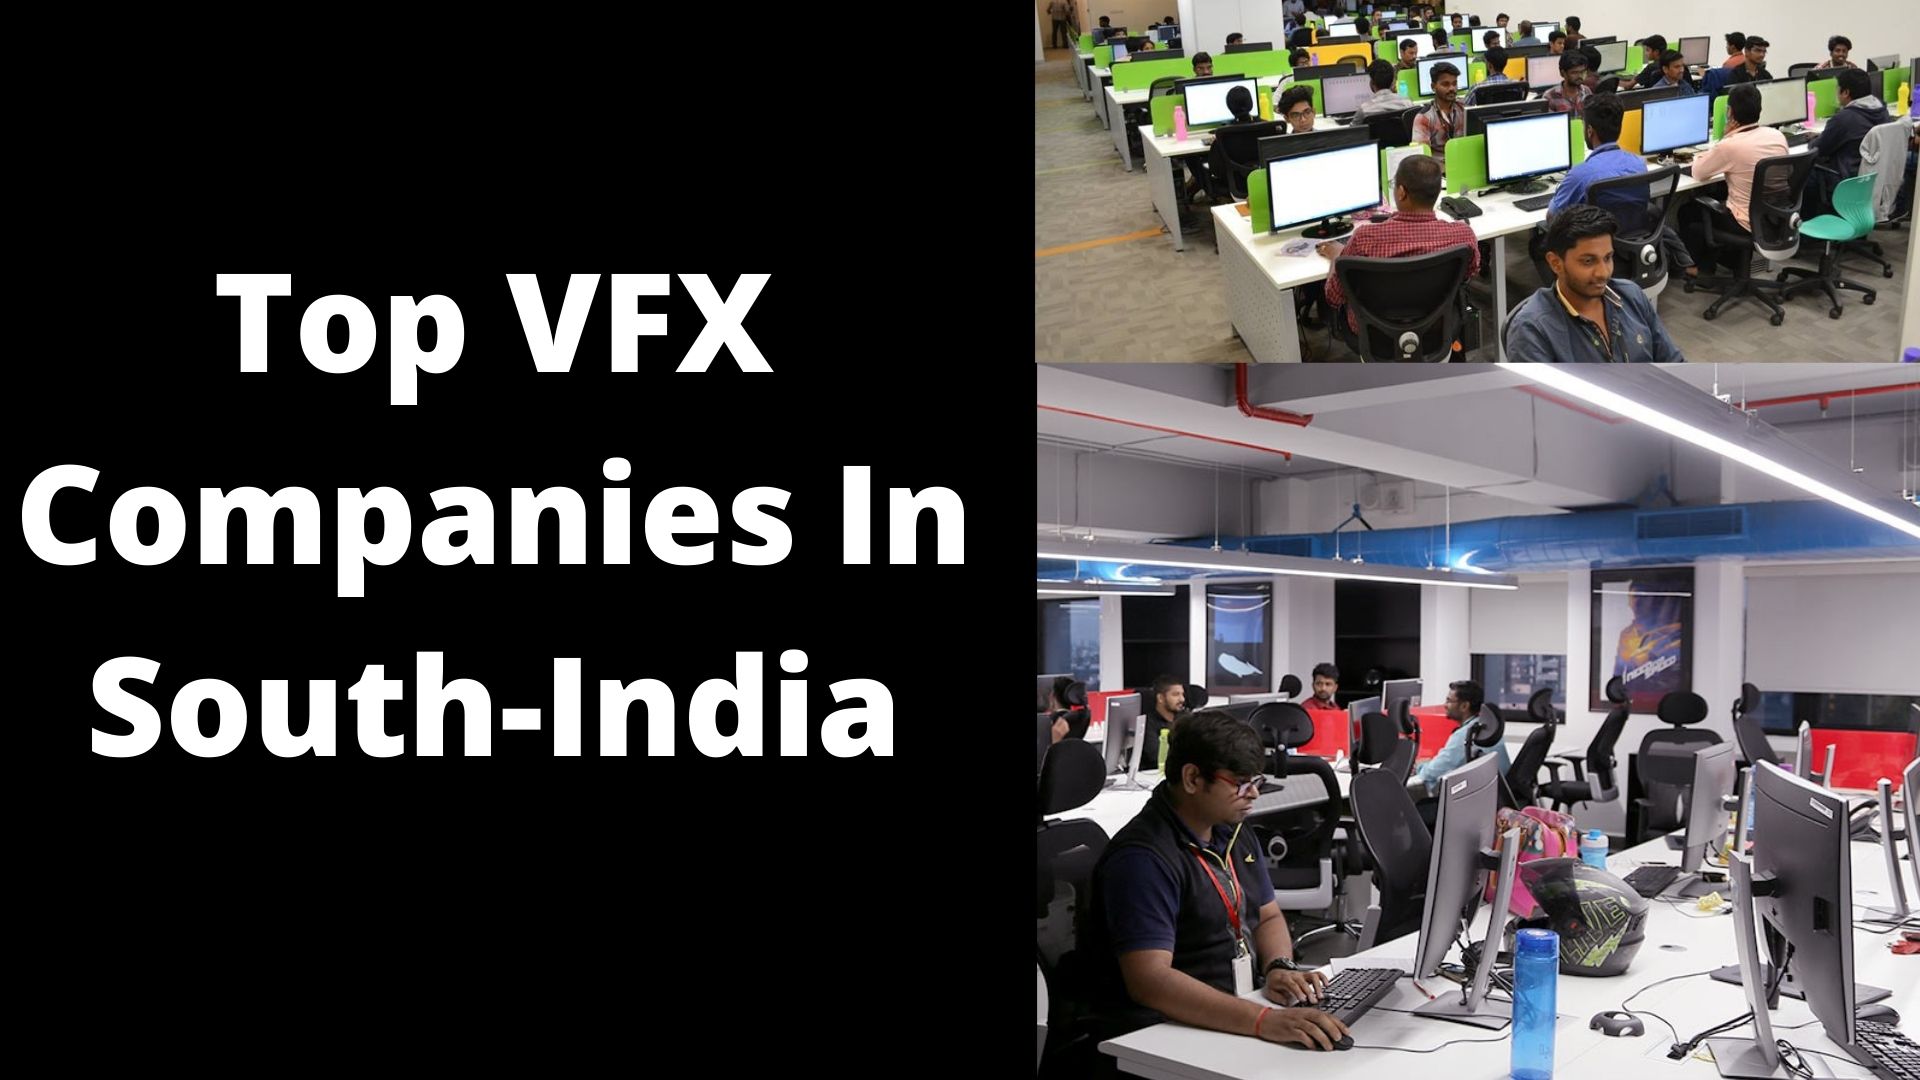 Top VFX Companies In South-India - vfxexpress